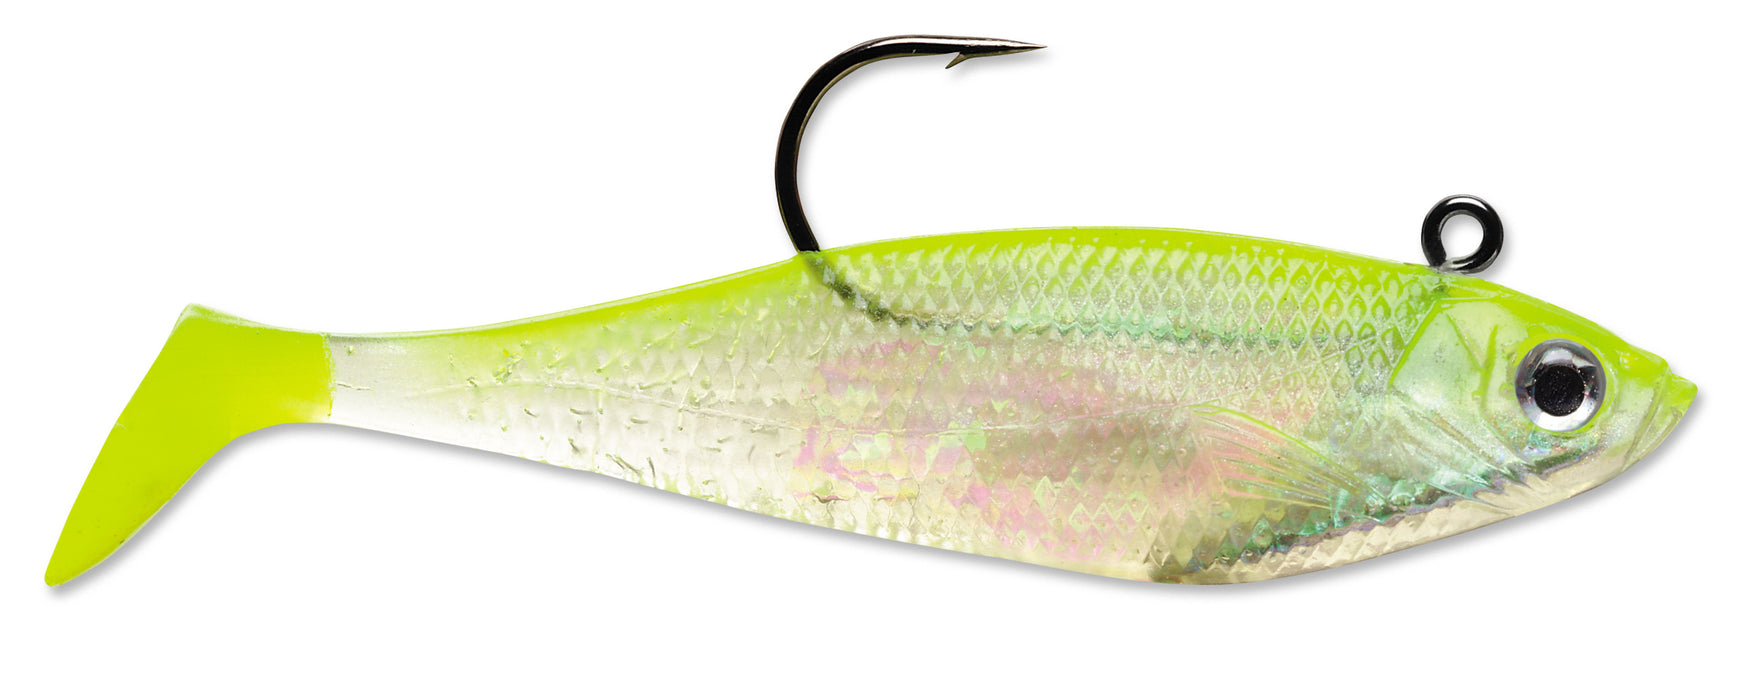 27-3.5Curl/Curly Tail Shad Soft Plastic Fishing Lure Action Swim